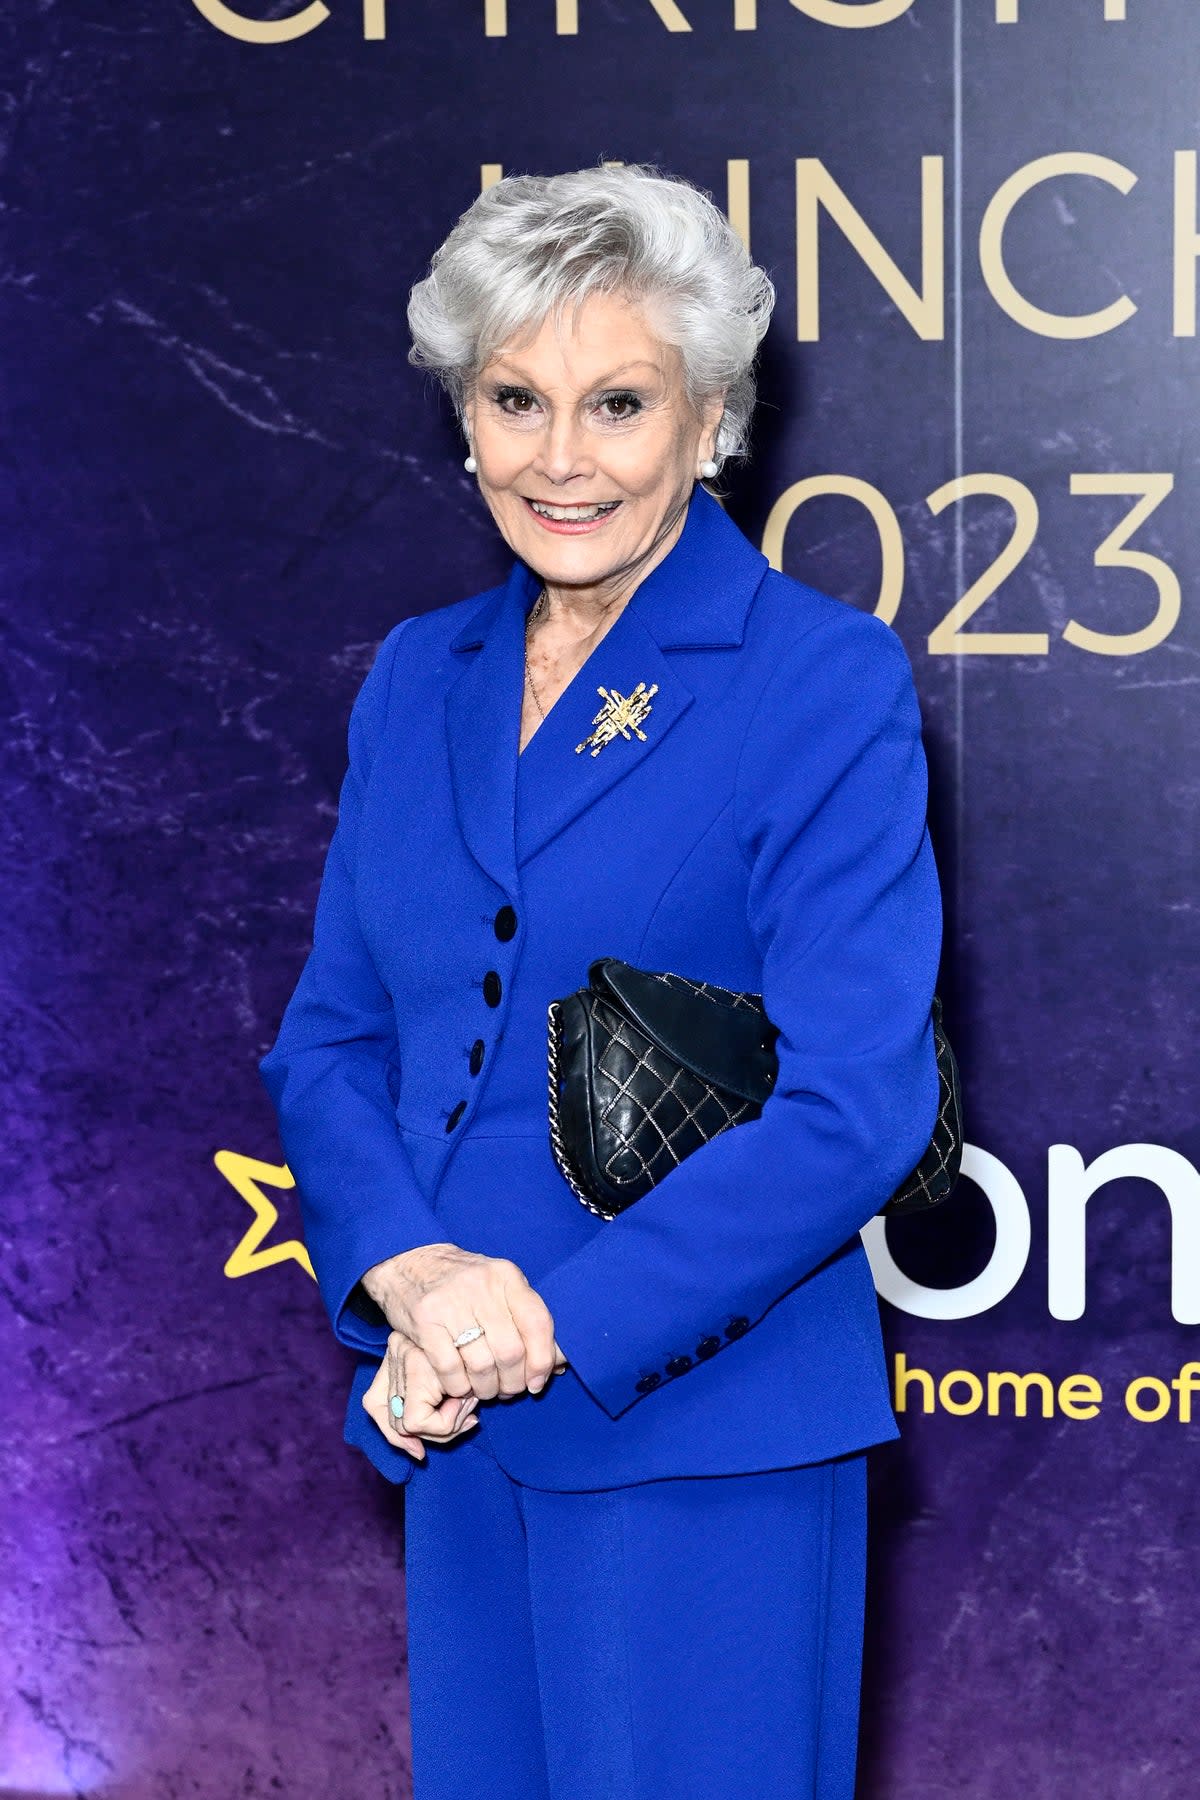 Angela Rippon pictured at the TRIC Christmas Lunch at The London Hotel on Tuesday  (Gareth Cattermole/Getty Images)